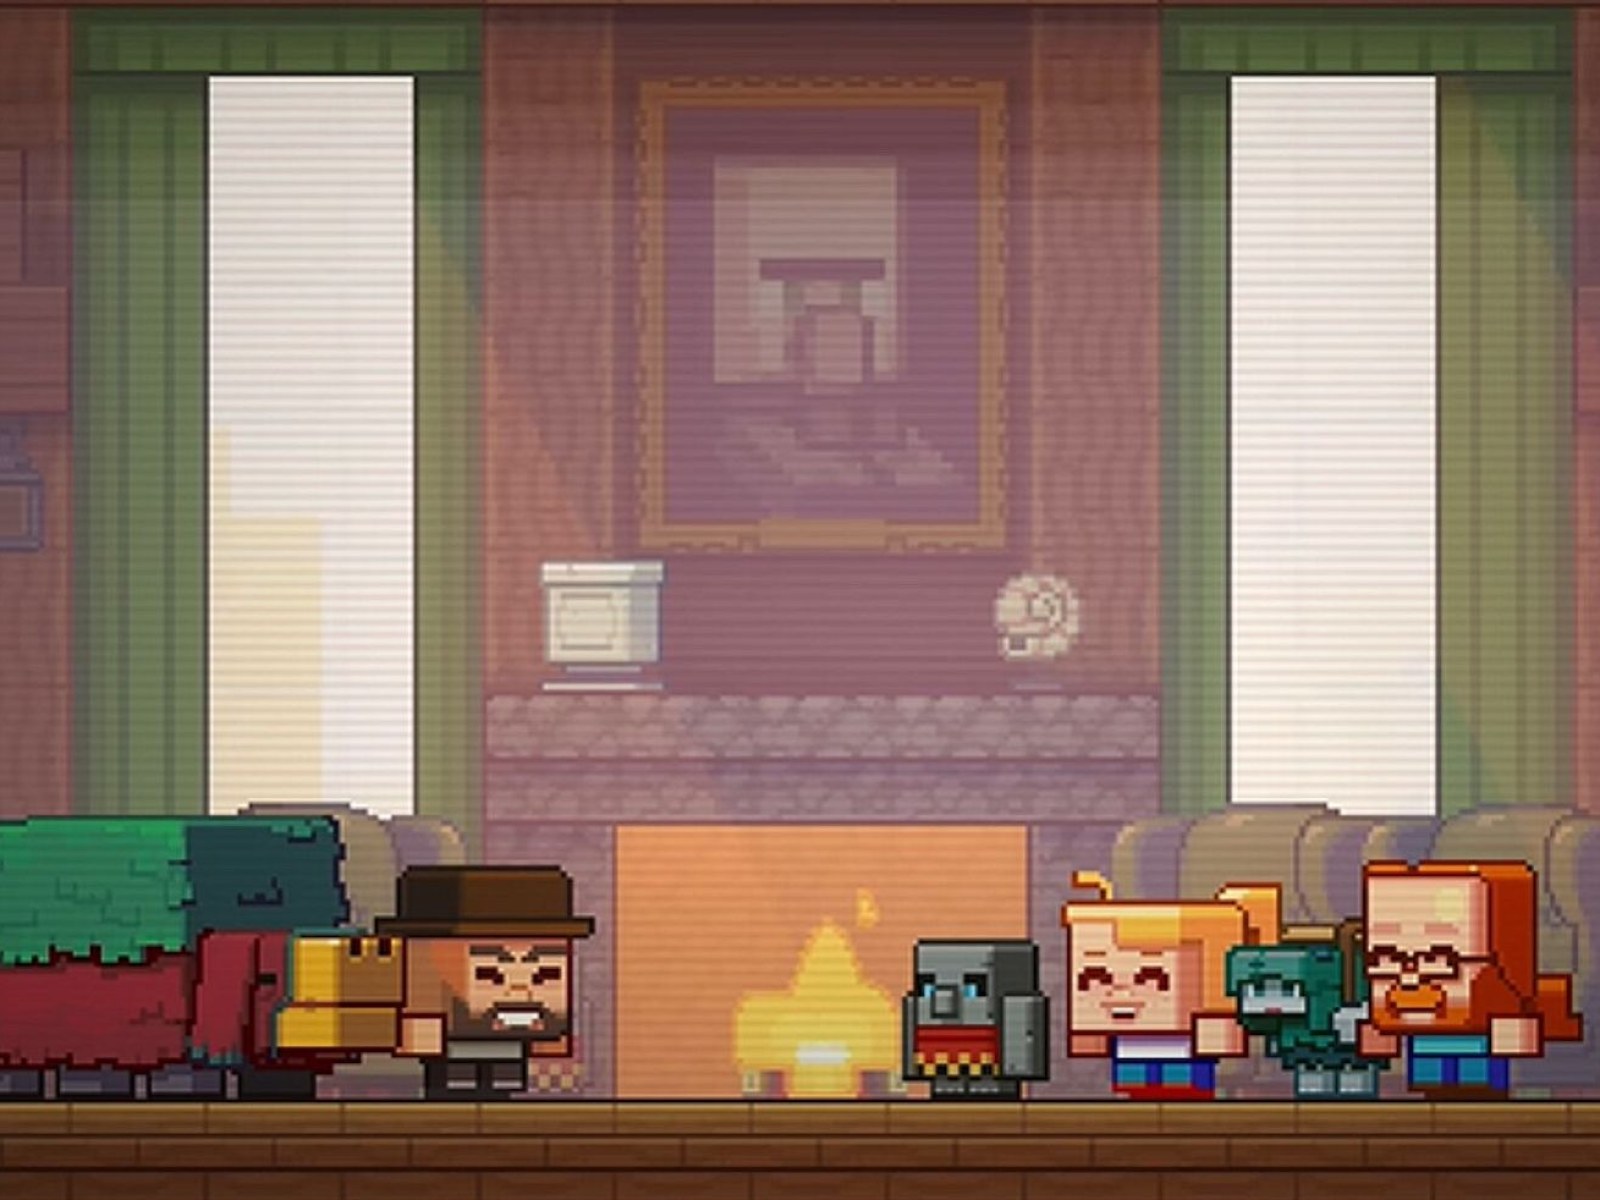 Mojang wants you to vote for the next mob in Minecraft